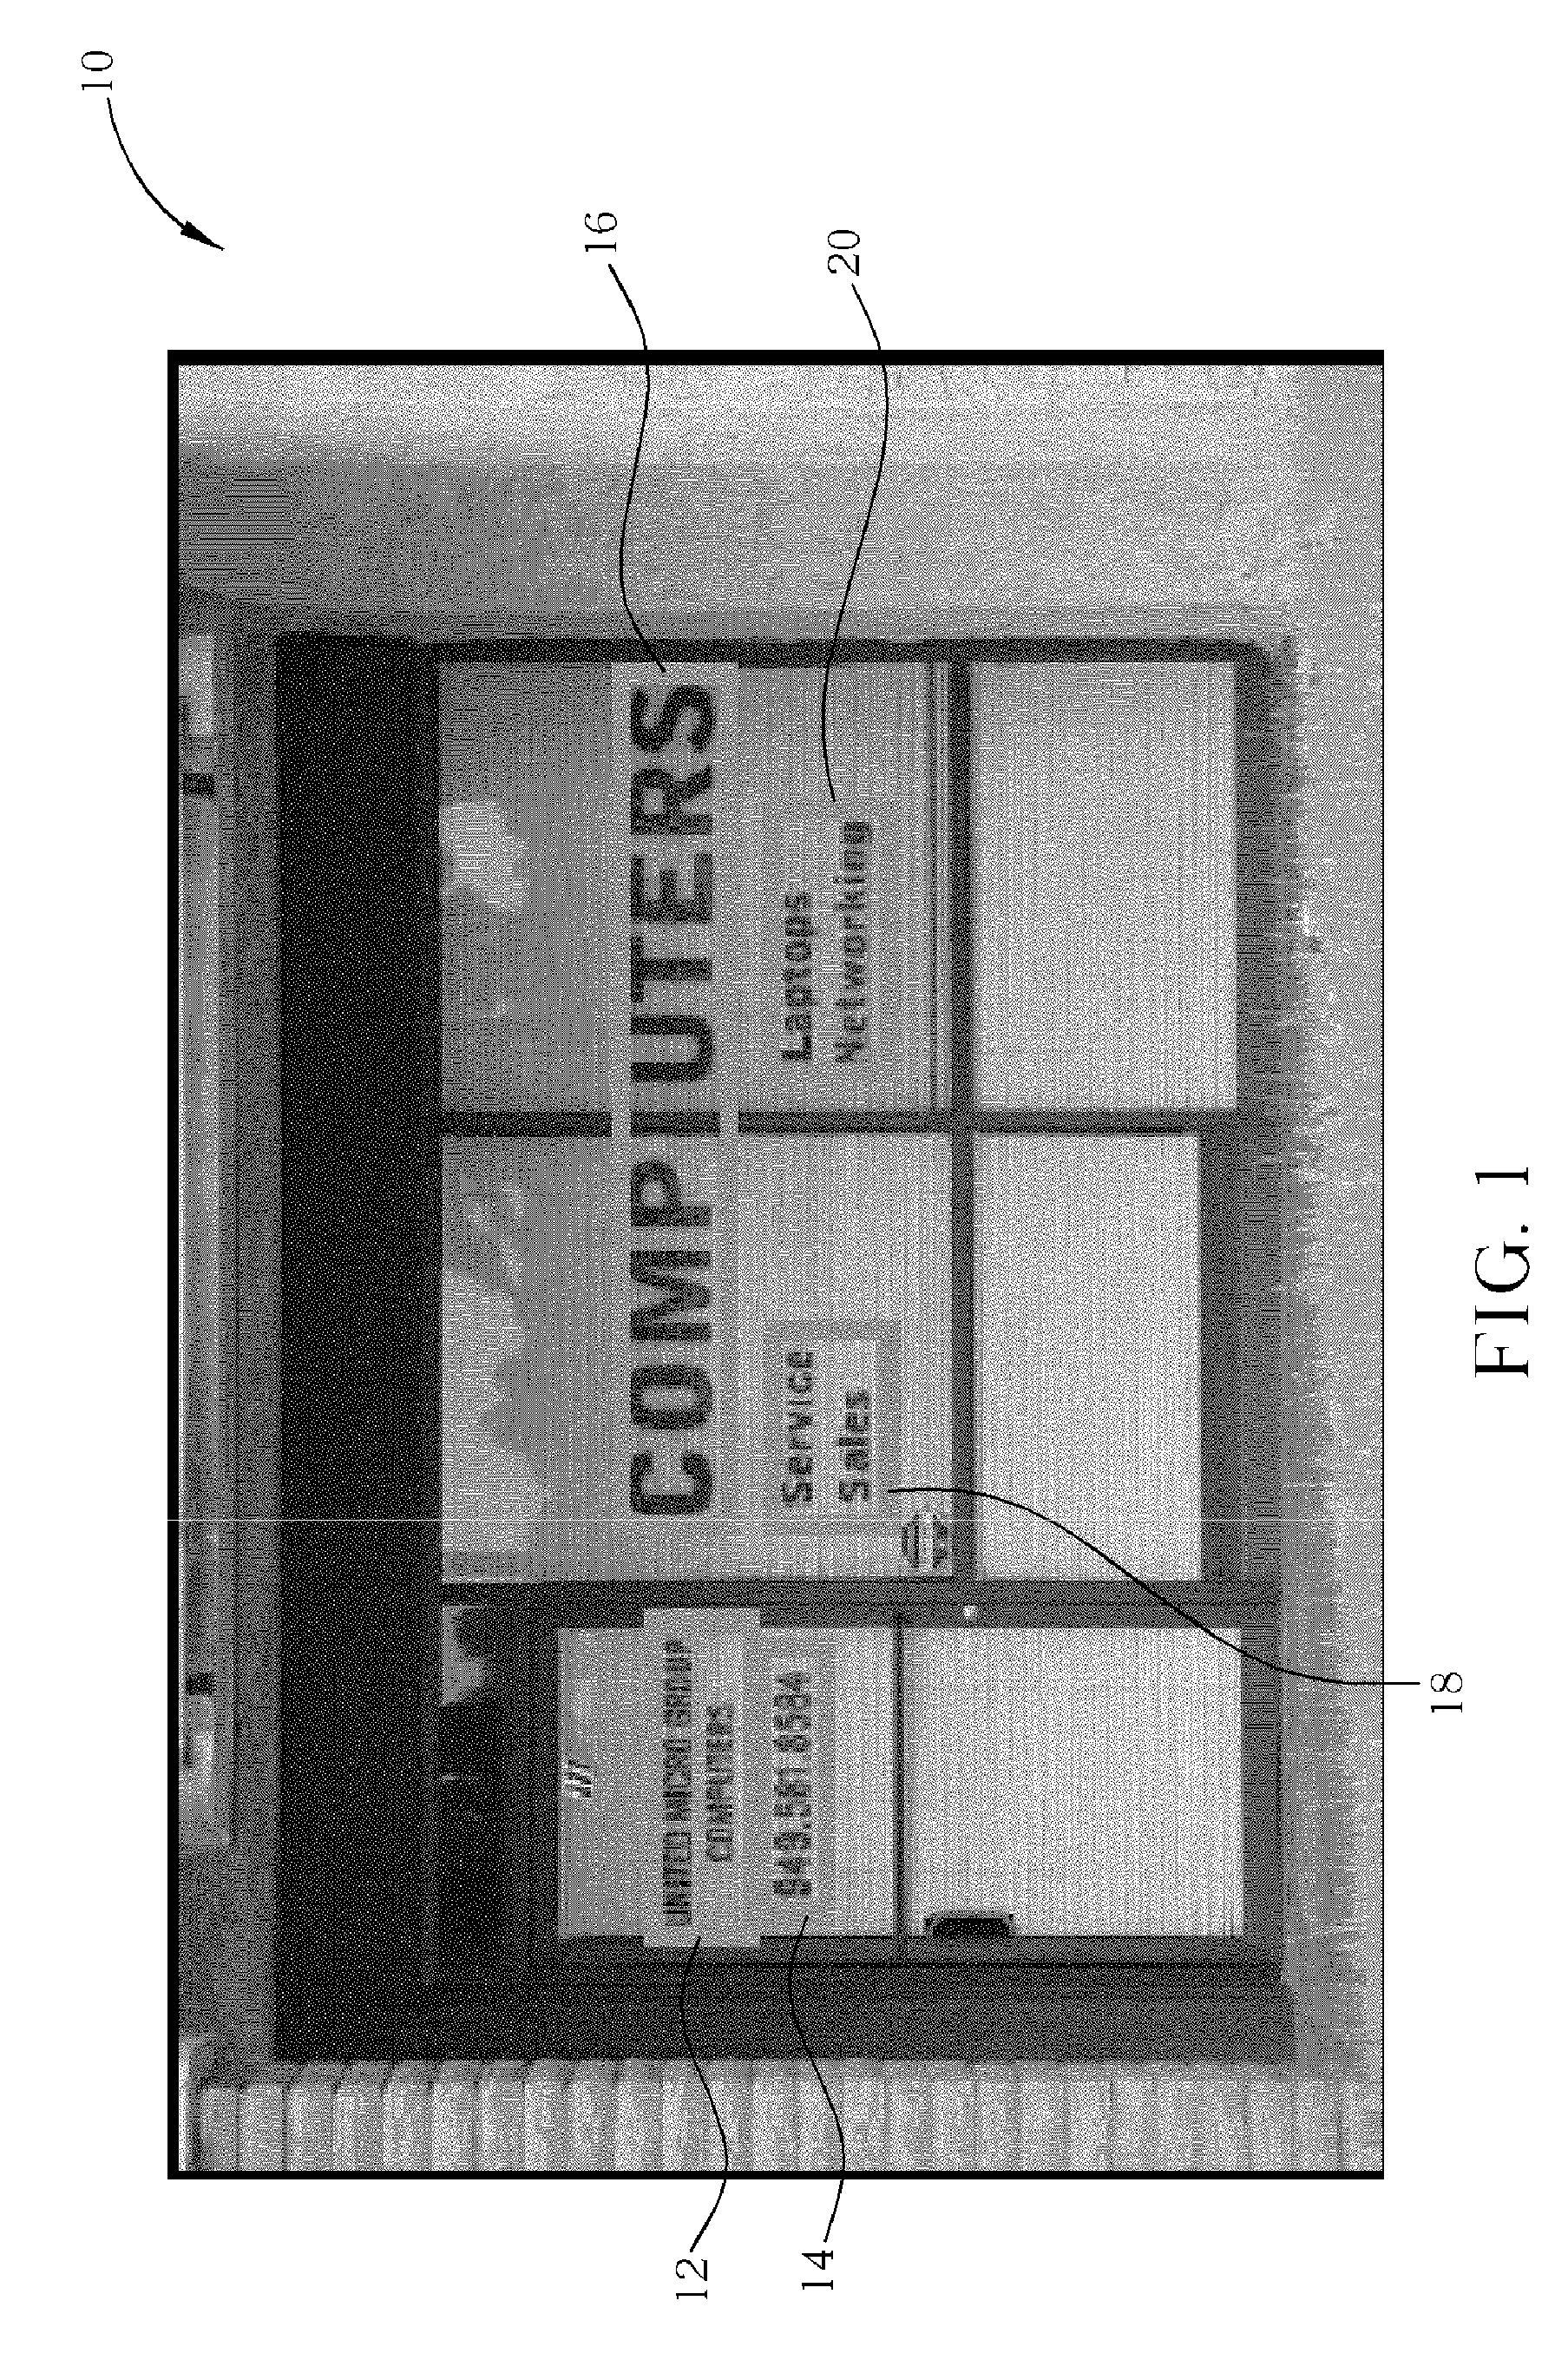 Personal navigation device and related method of adding tags to photos according to content of the photos and geographical information of where photos were taken